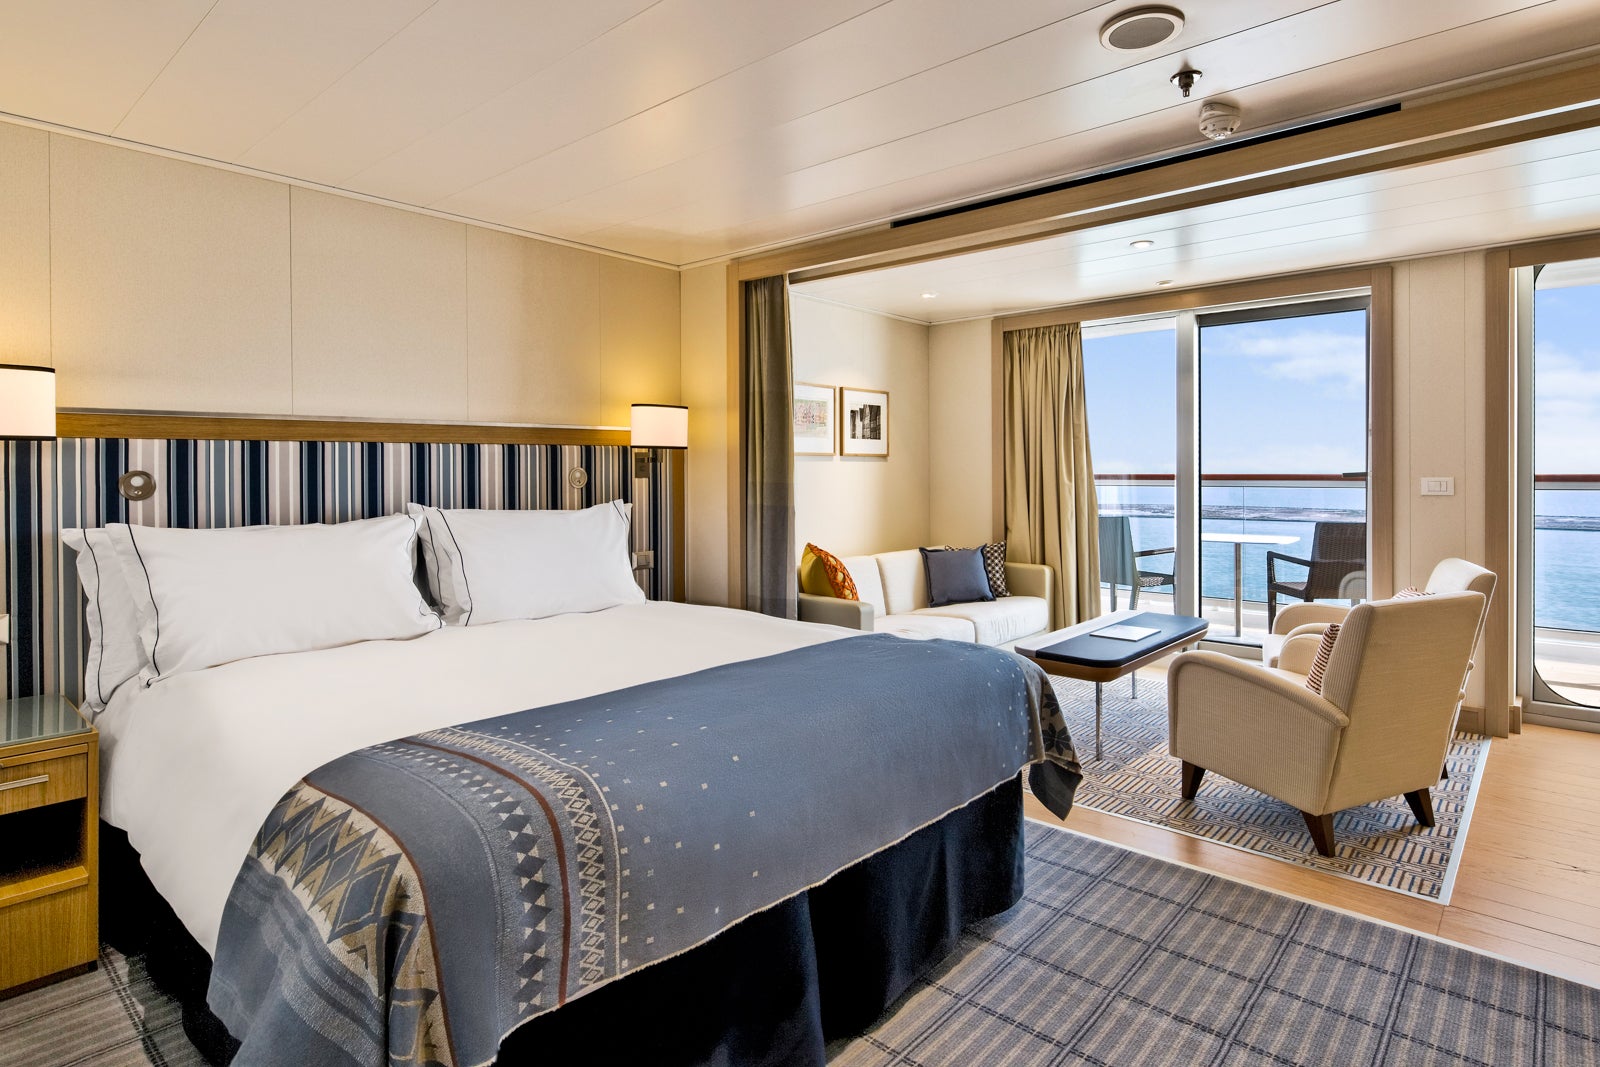 Viking cruise cabins and suites: A guide to everything you want to know